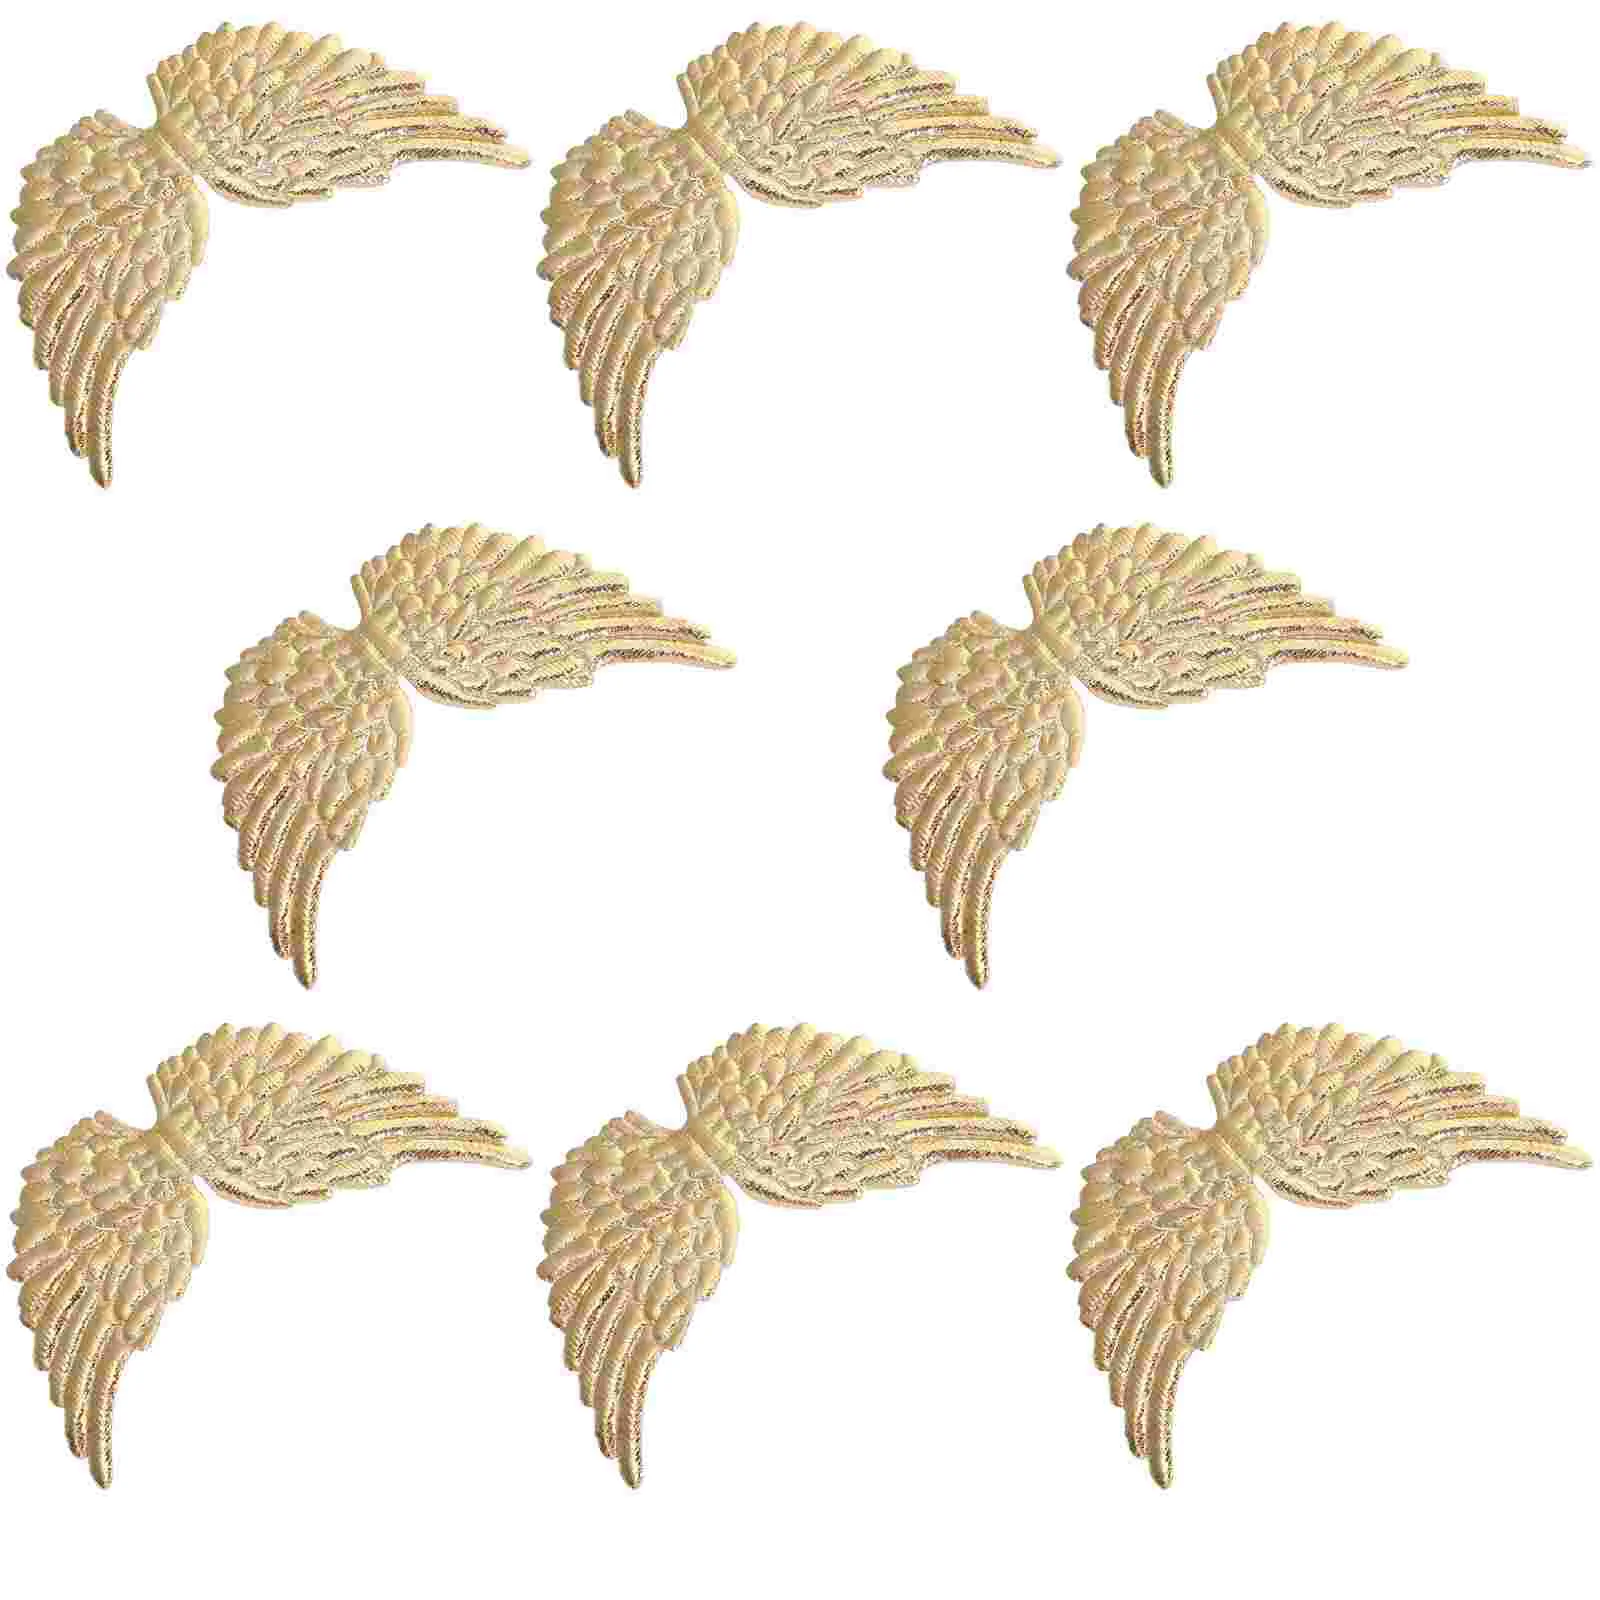 

For Crafts Decor Ornament Ornaments Diyaccessories Wing Christmas Pendants Partyfabric Crafthome Decorations Wall Mini Fairy